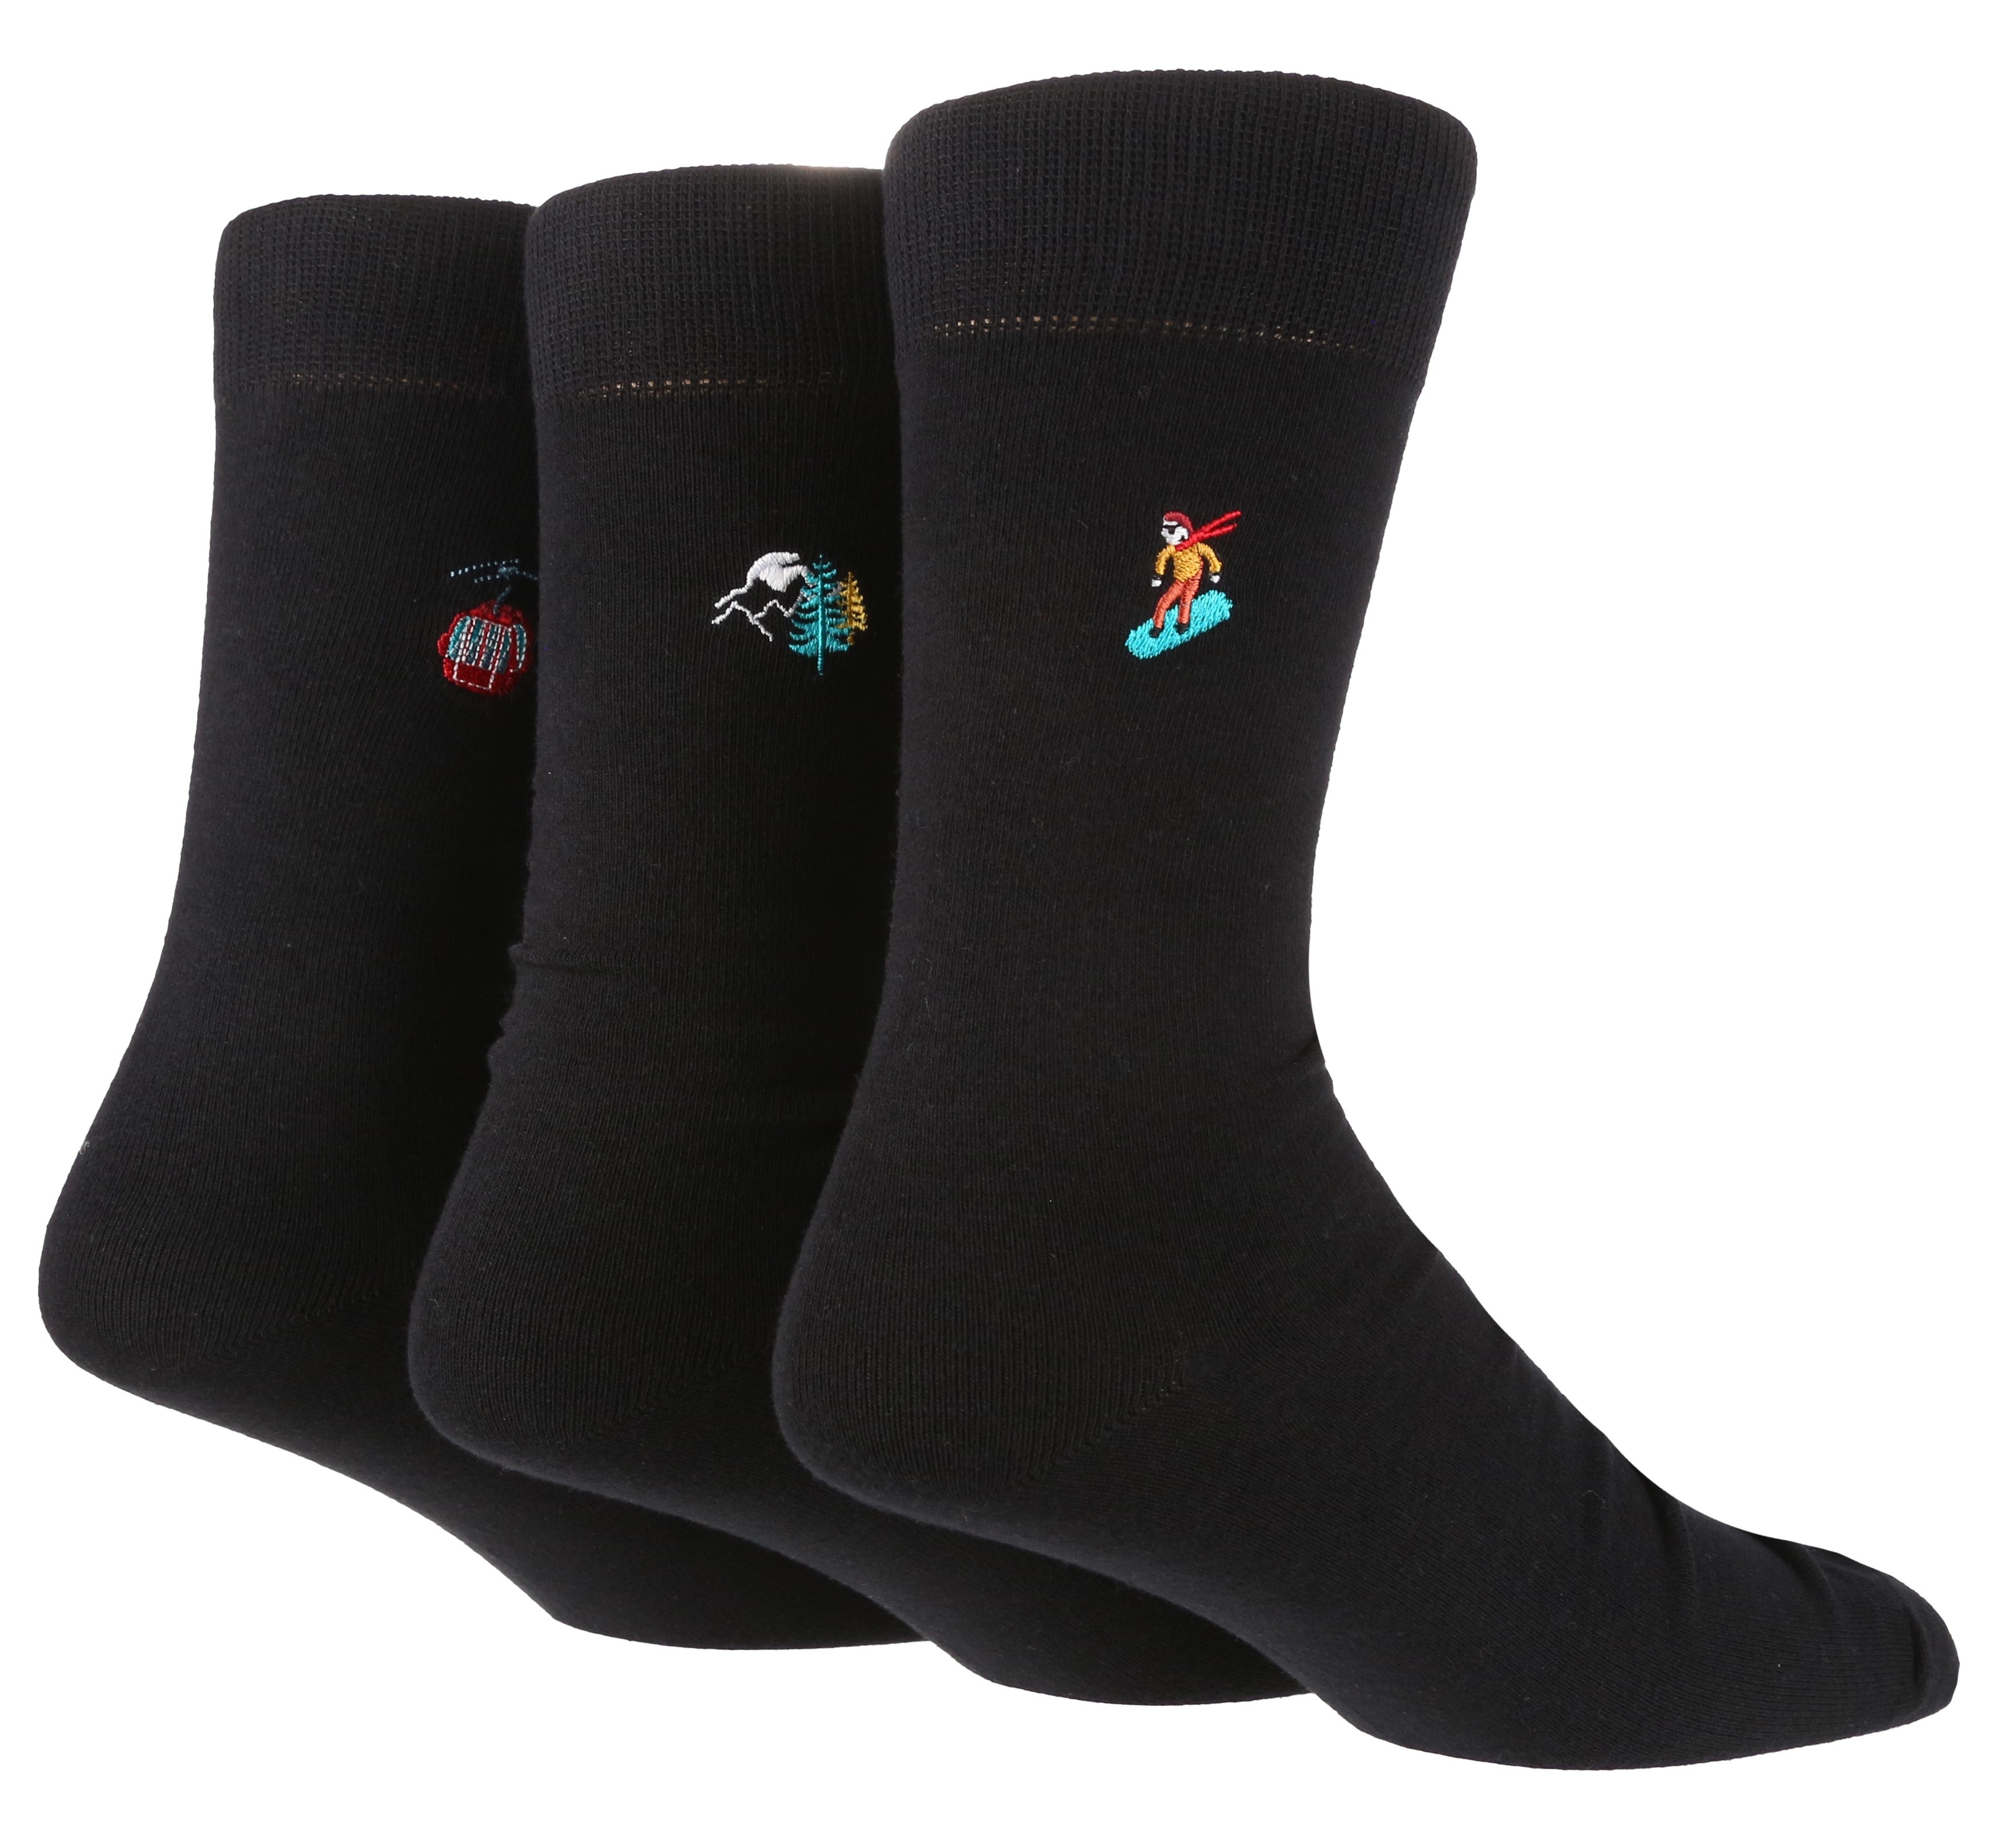 WILDFEET 3pk Embroided Cotton Novelty Crew - Mens 7-11